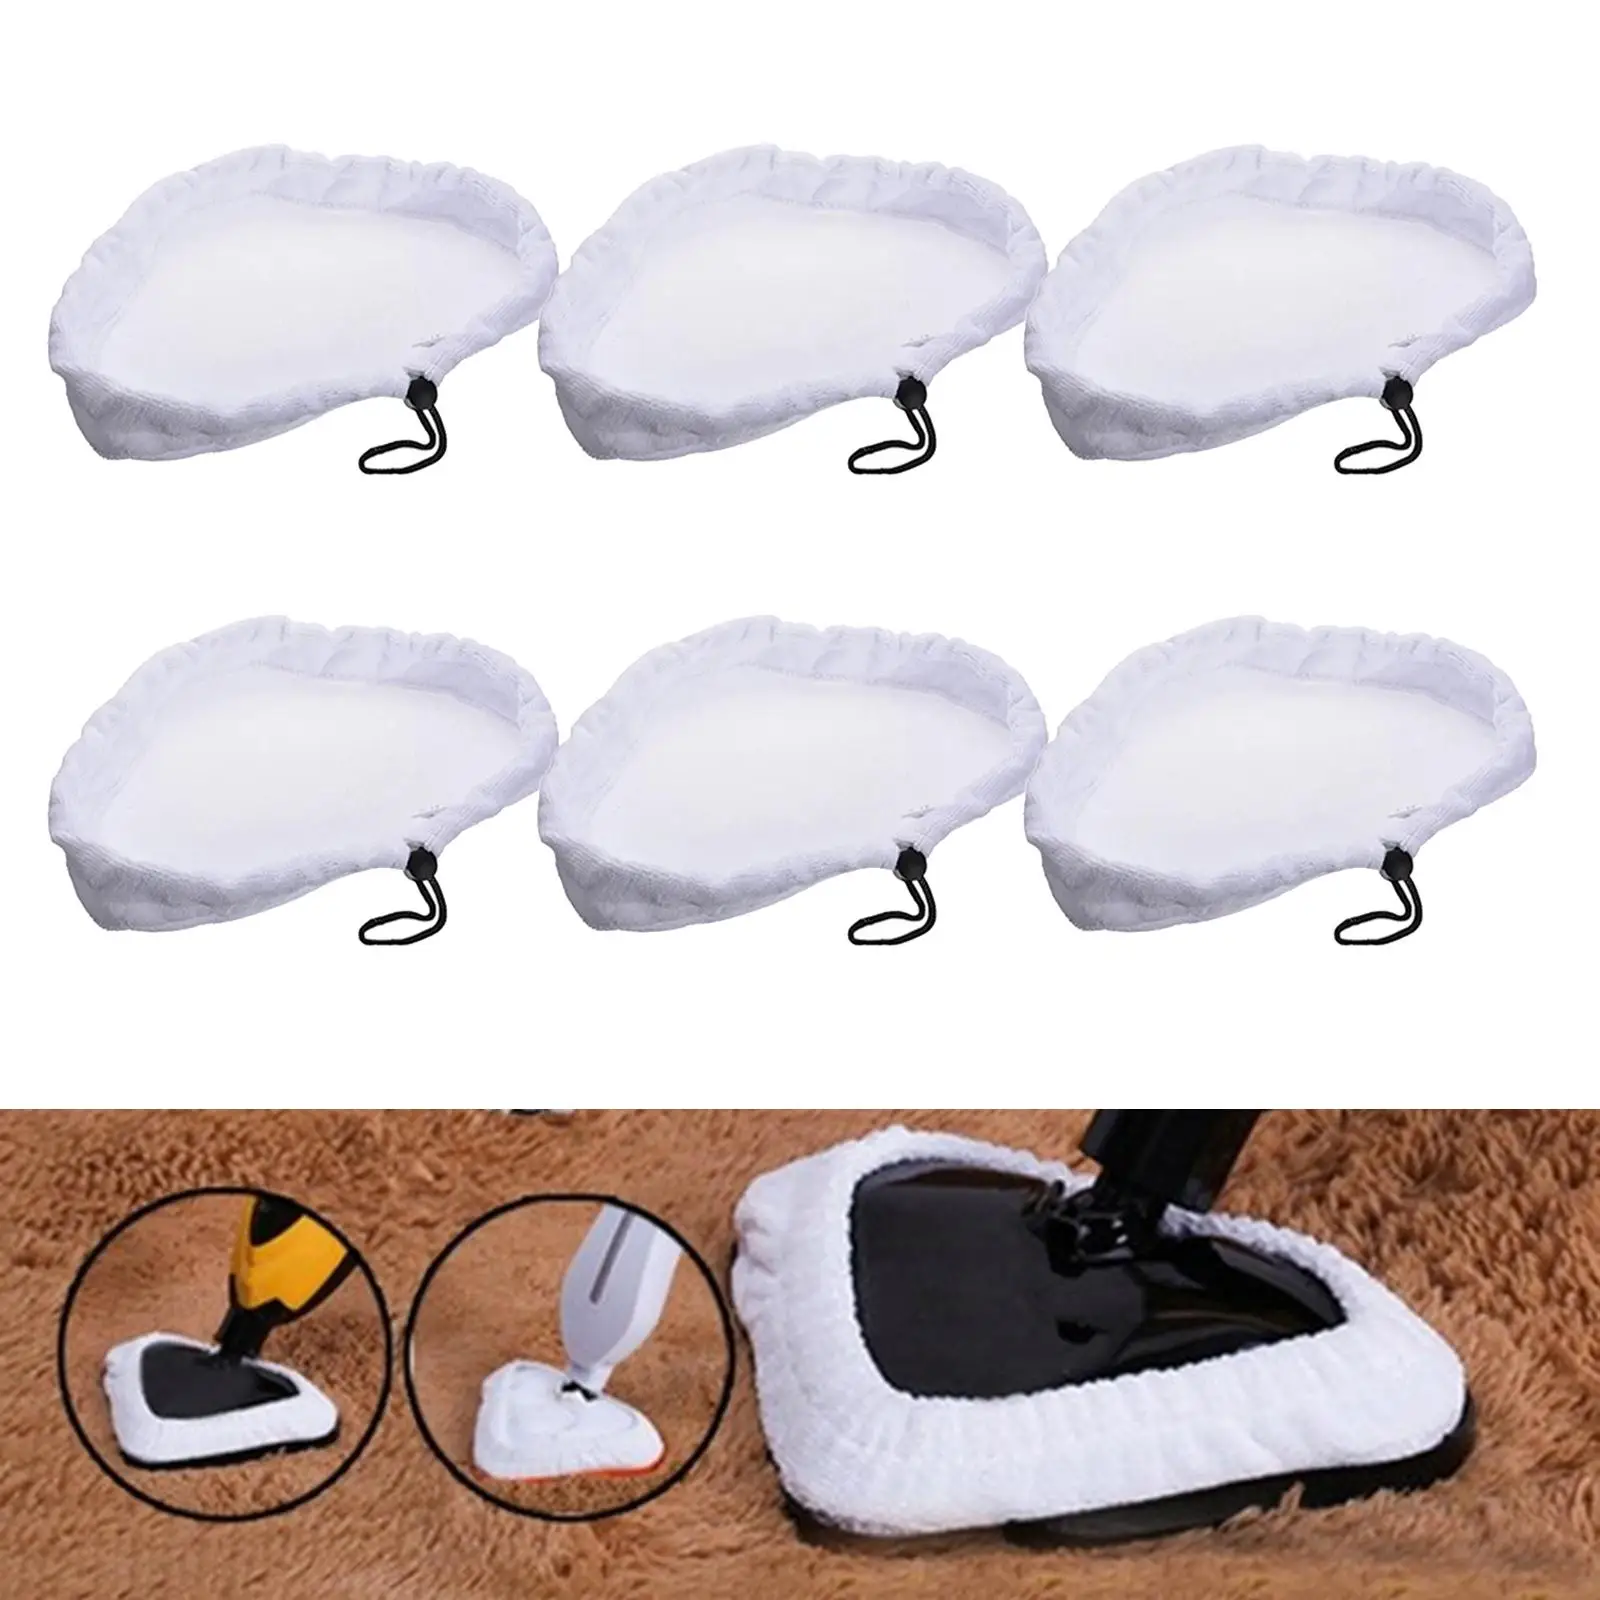 6Pcs Steam Mop Pad Floor Cleaning Pad Washable for X5 S302 S001 Steam Mop